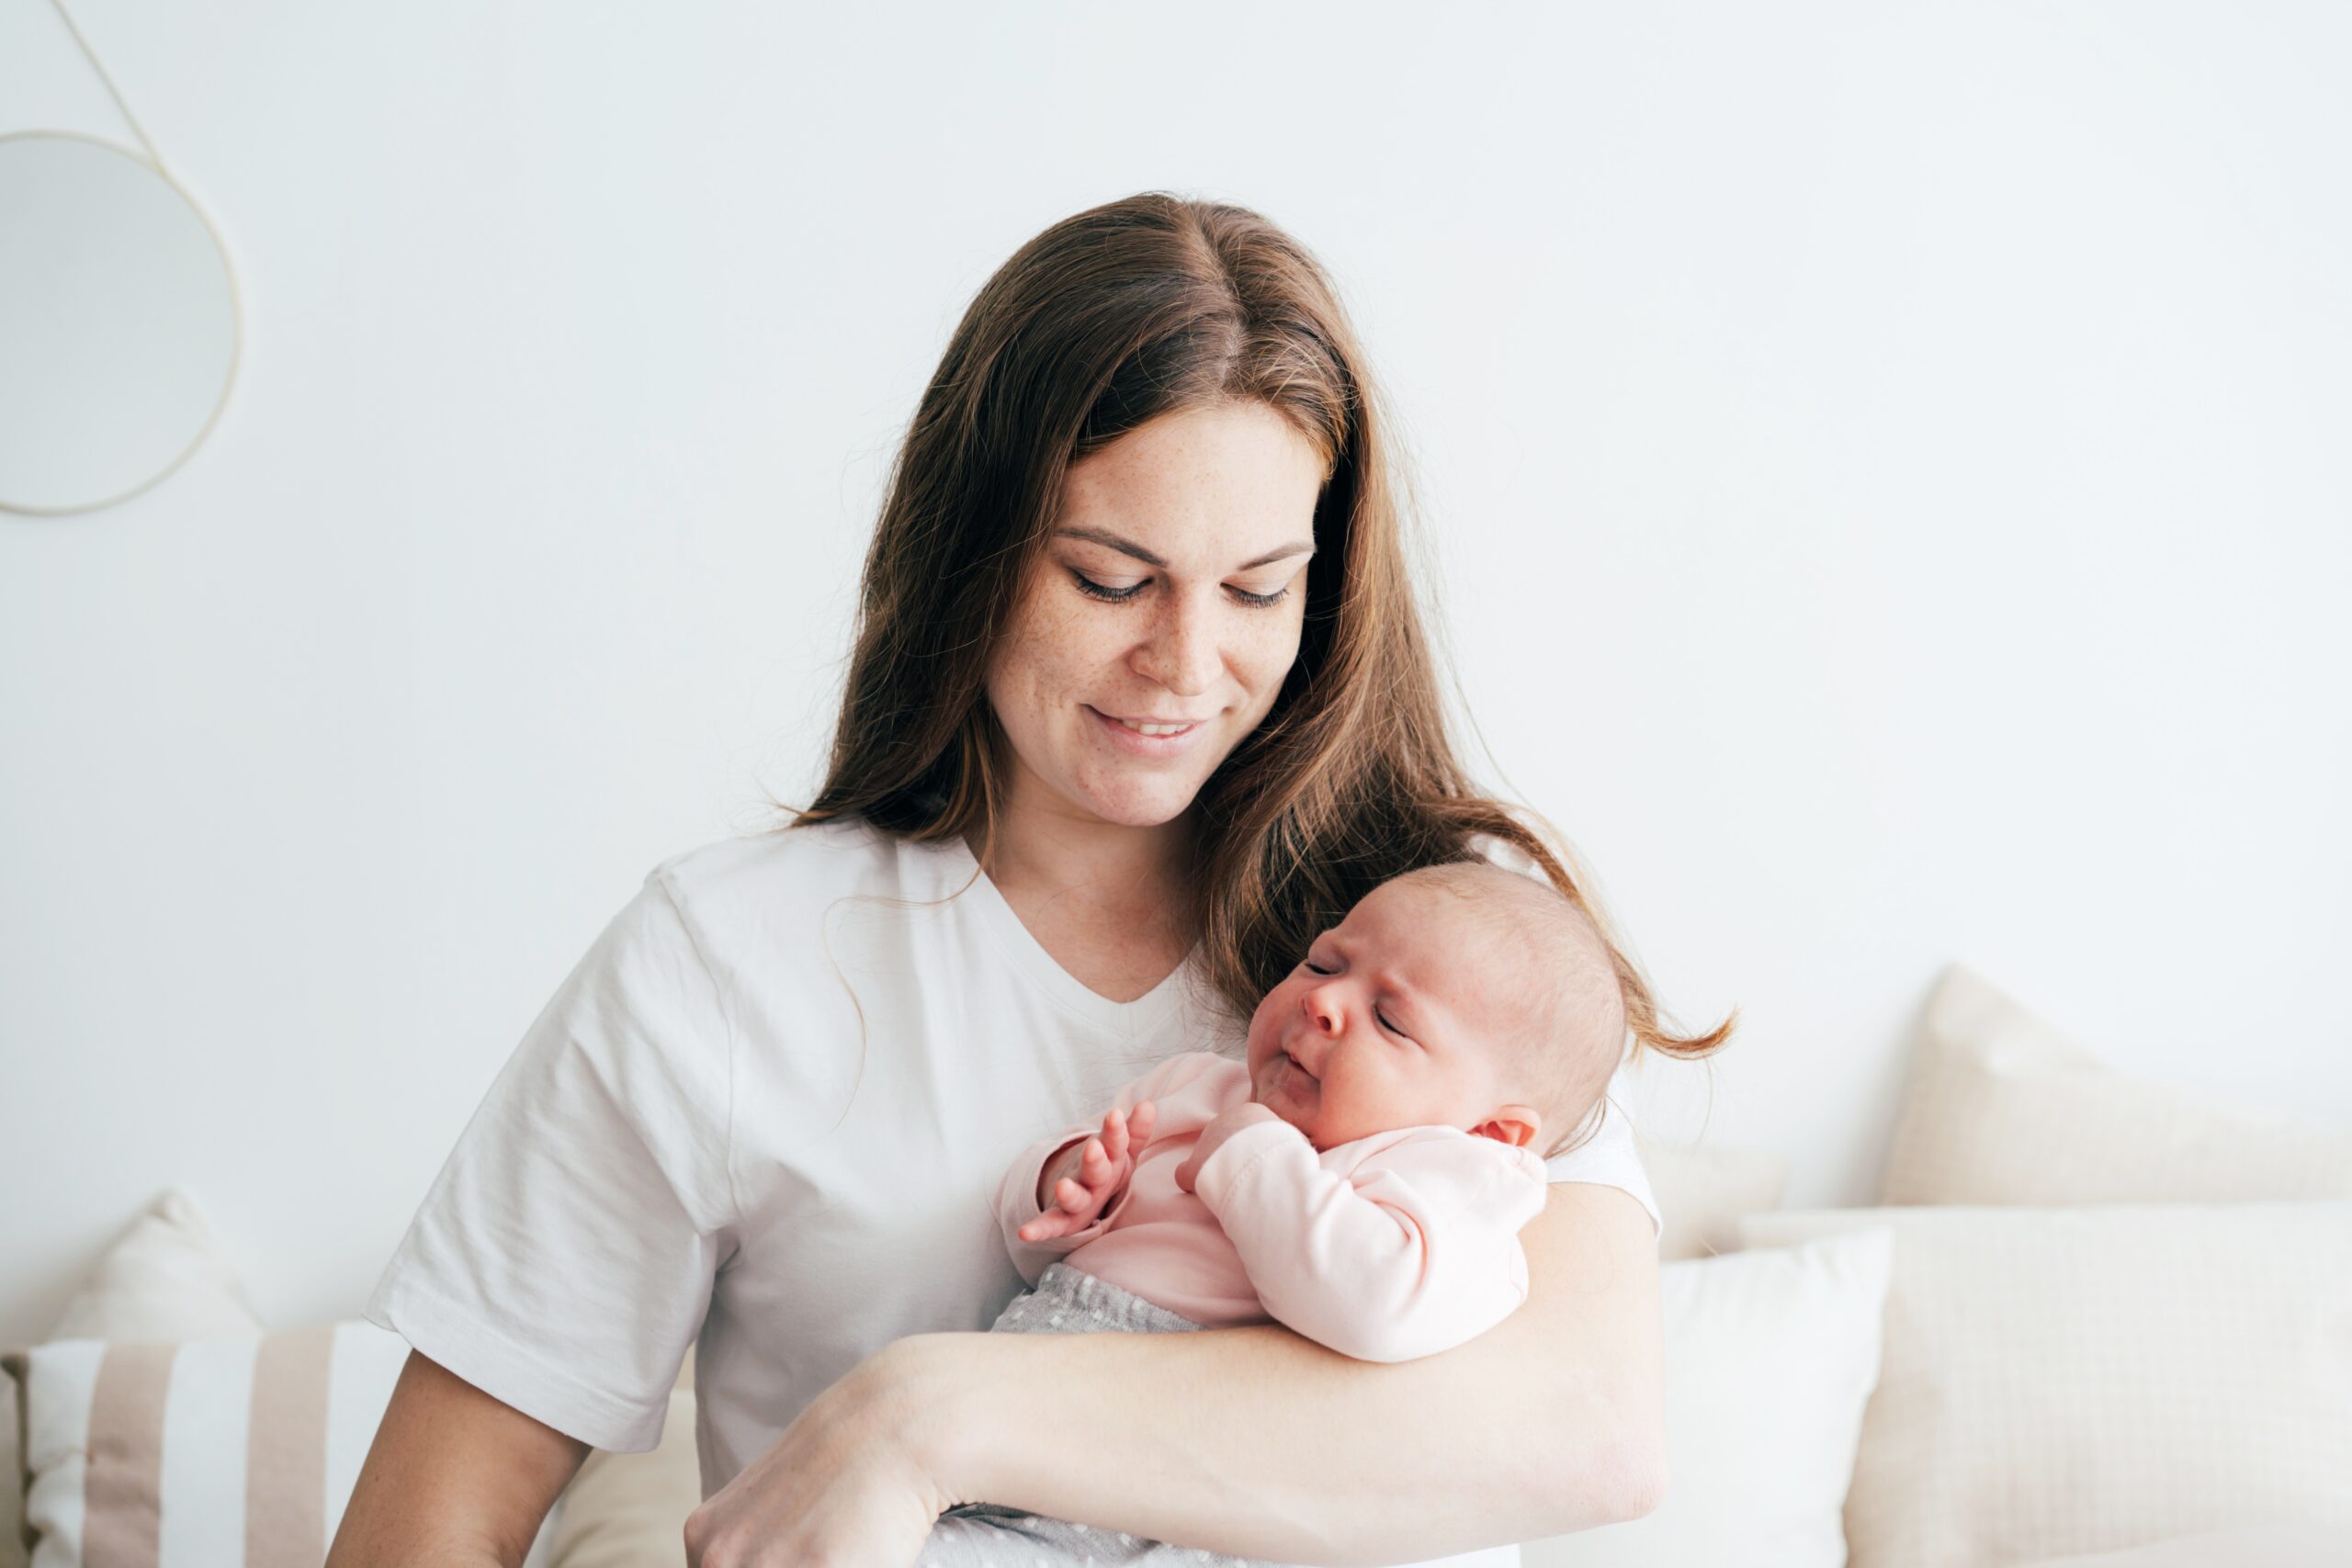 Postnatal – Support when feeling isolated in the postnatal period